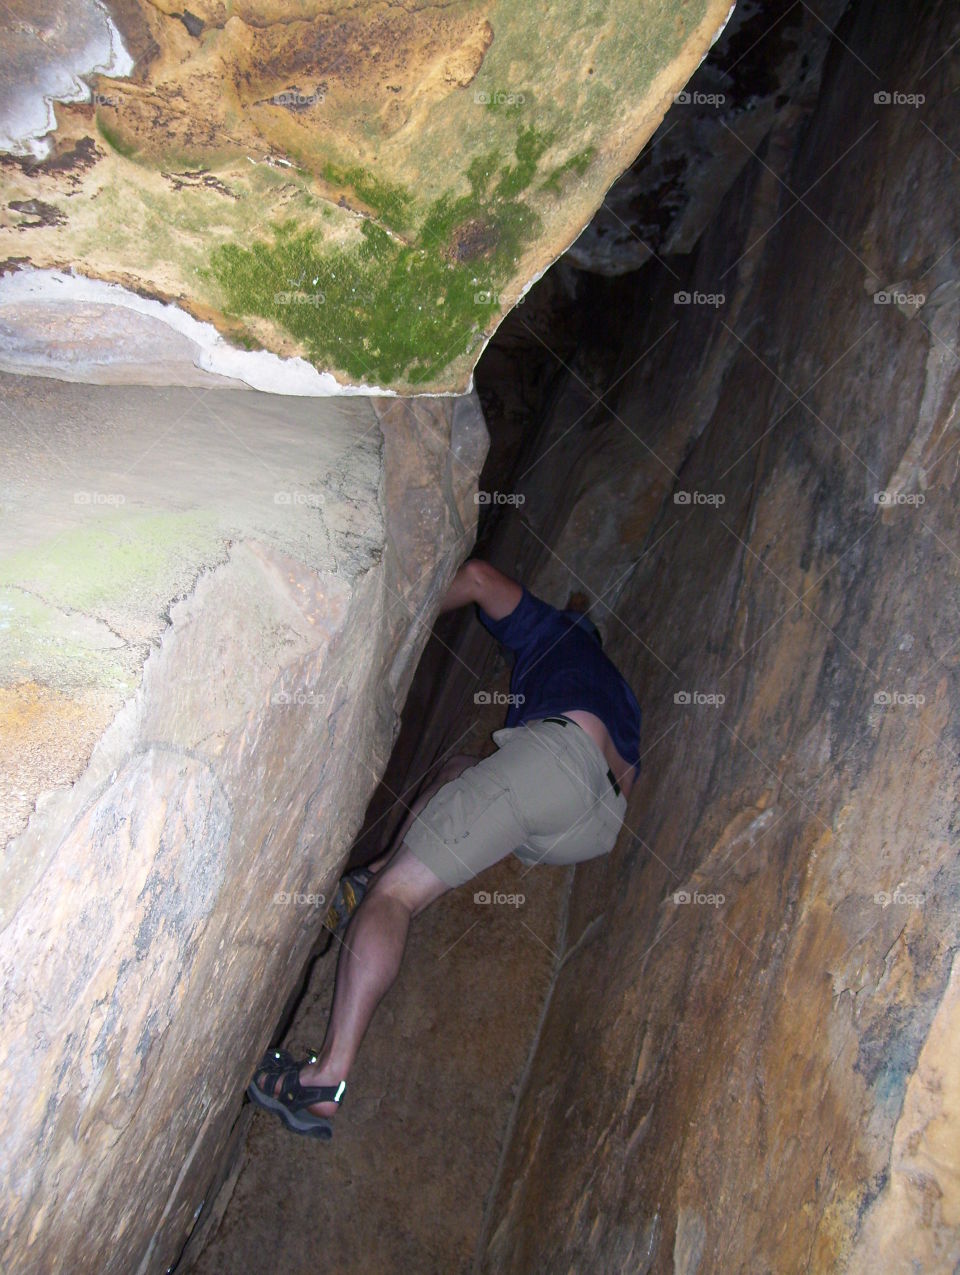 climbing in tight spaces. husband climbing in between rocks